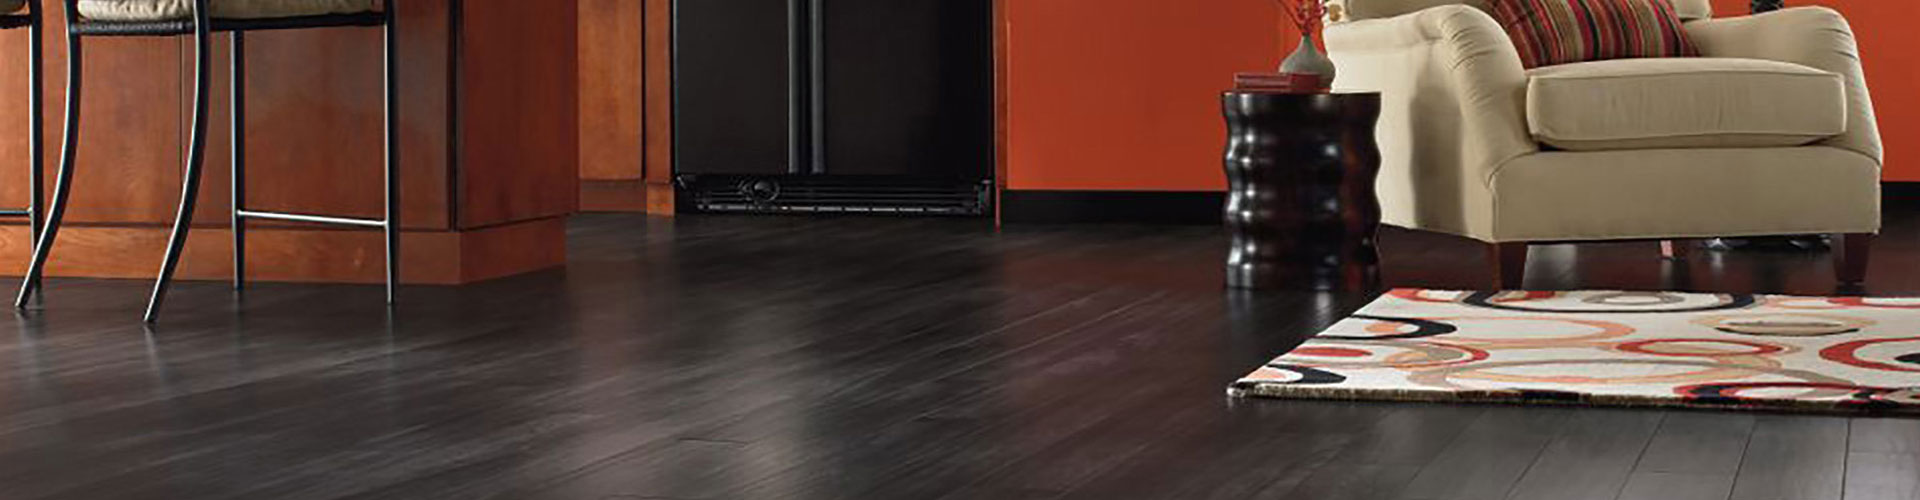 We carry a wide selection of laminate flooring